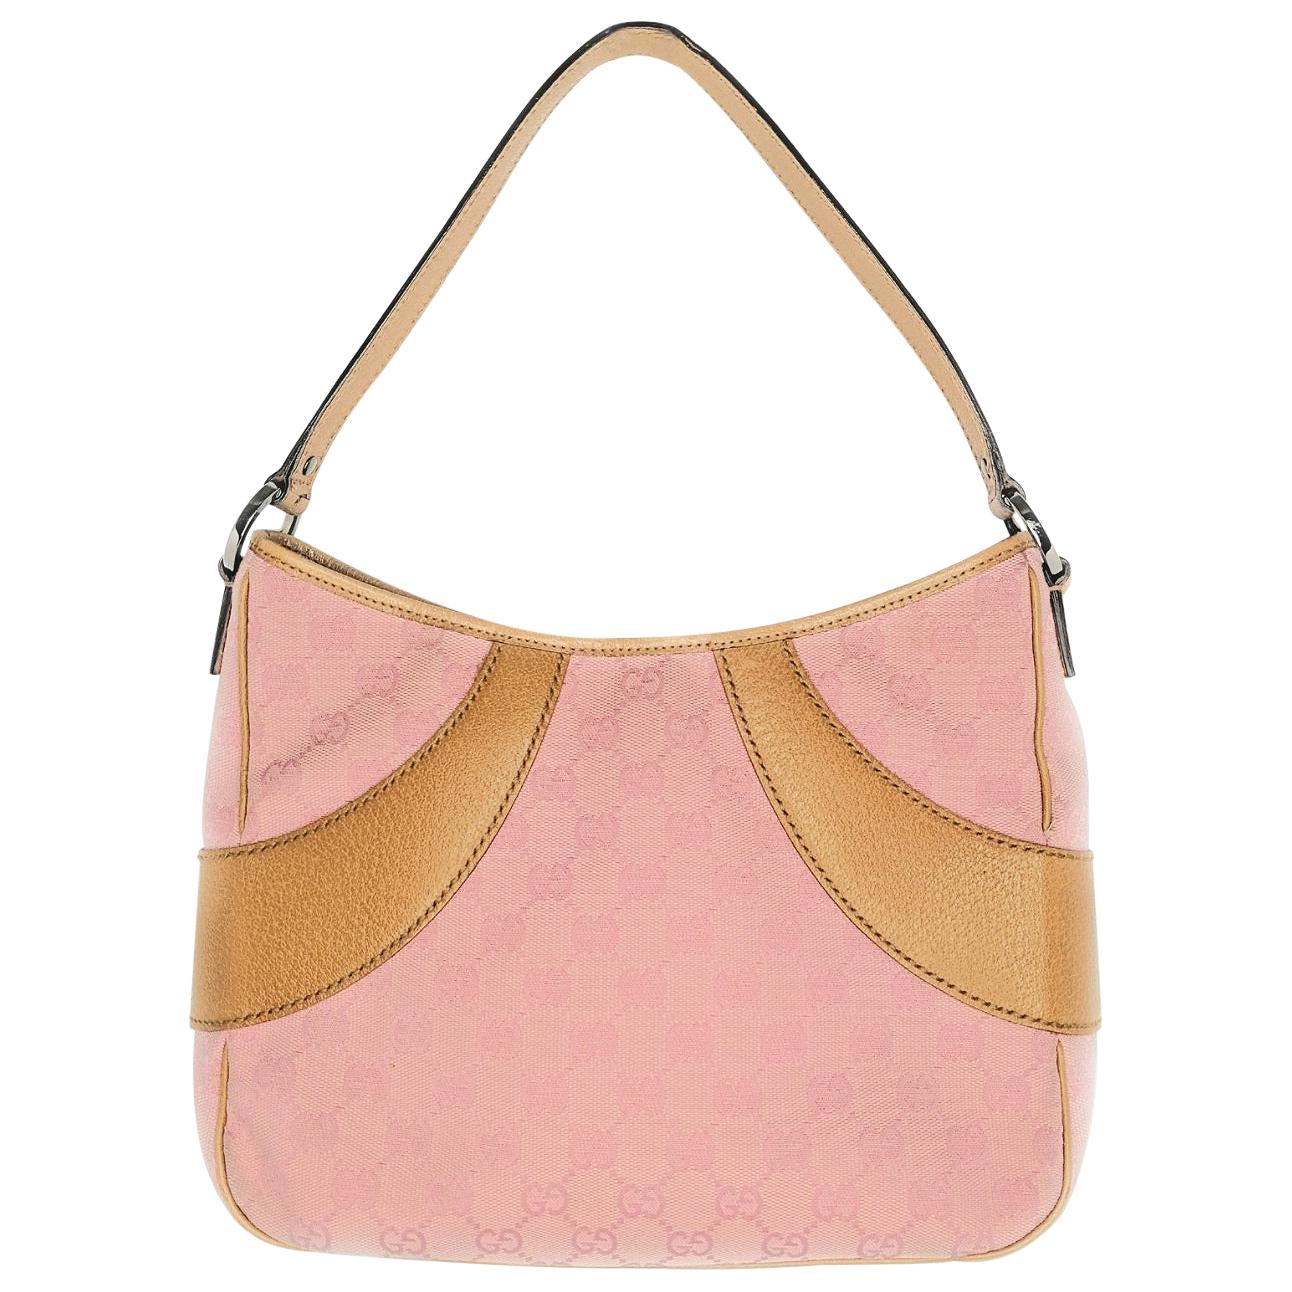 Gucci GG Pink Canvas Leather Small Hobo Shoulder Bag